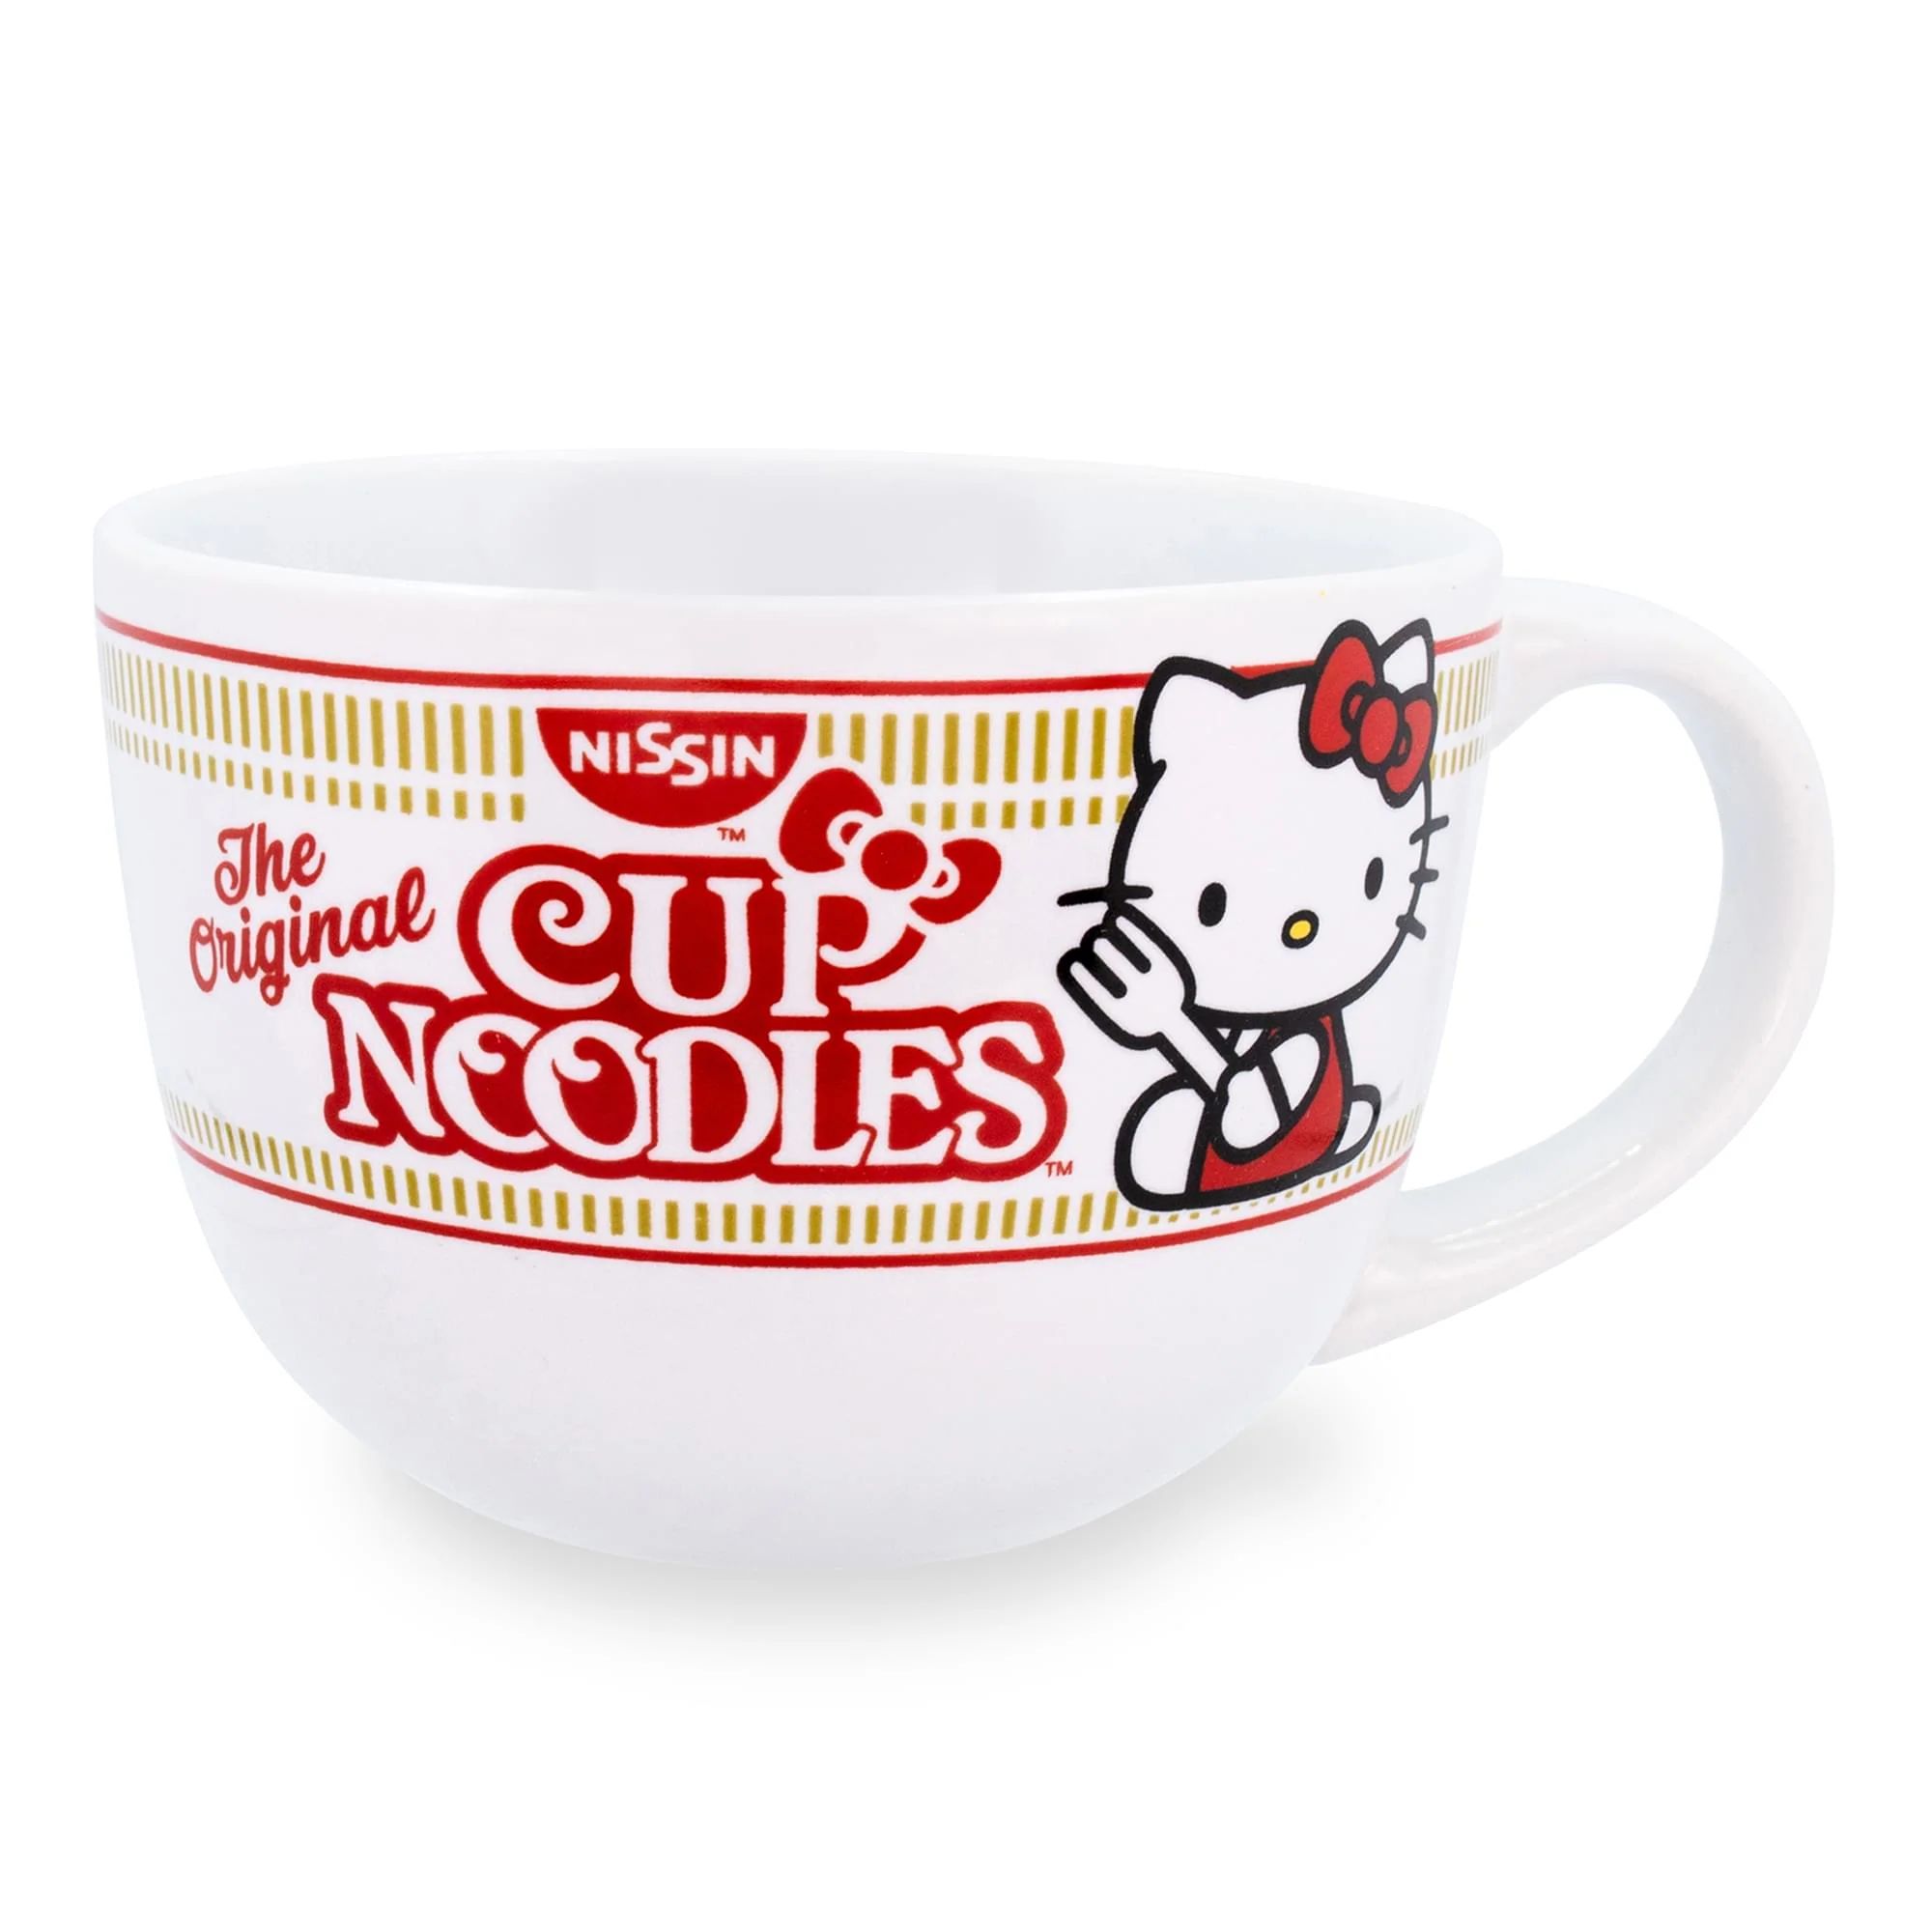 Sanrio Hello Kitty x Nissin Cup Noodles Ceramic Soup Mug | Holds 24 Ounces | Toynk